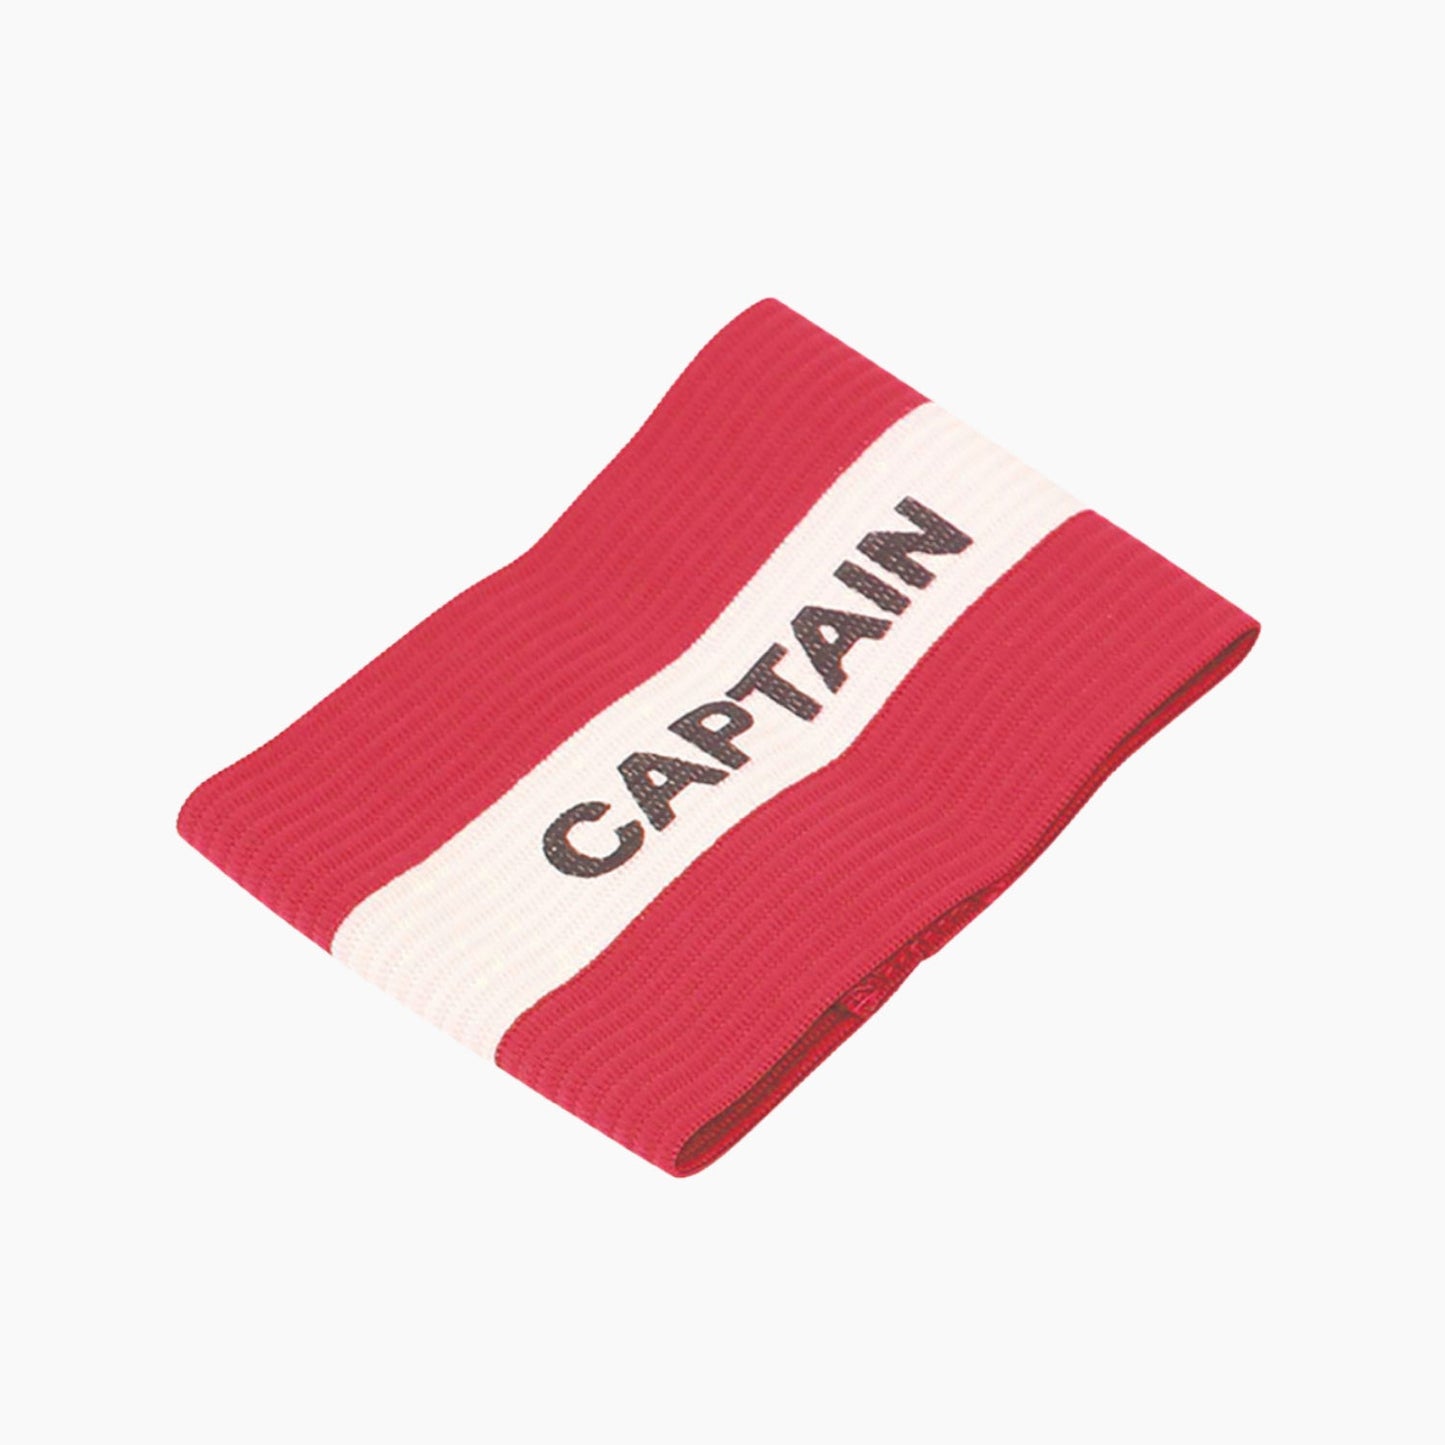 Buy Captain arm band-Splay (UK) Limited-Red/White-Splay UK Online